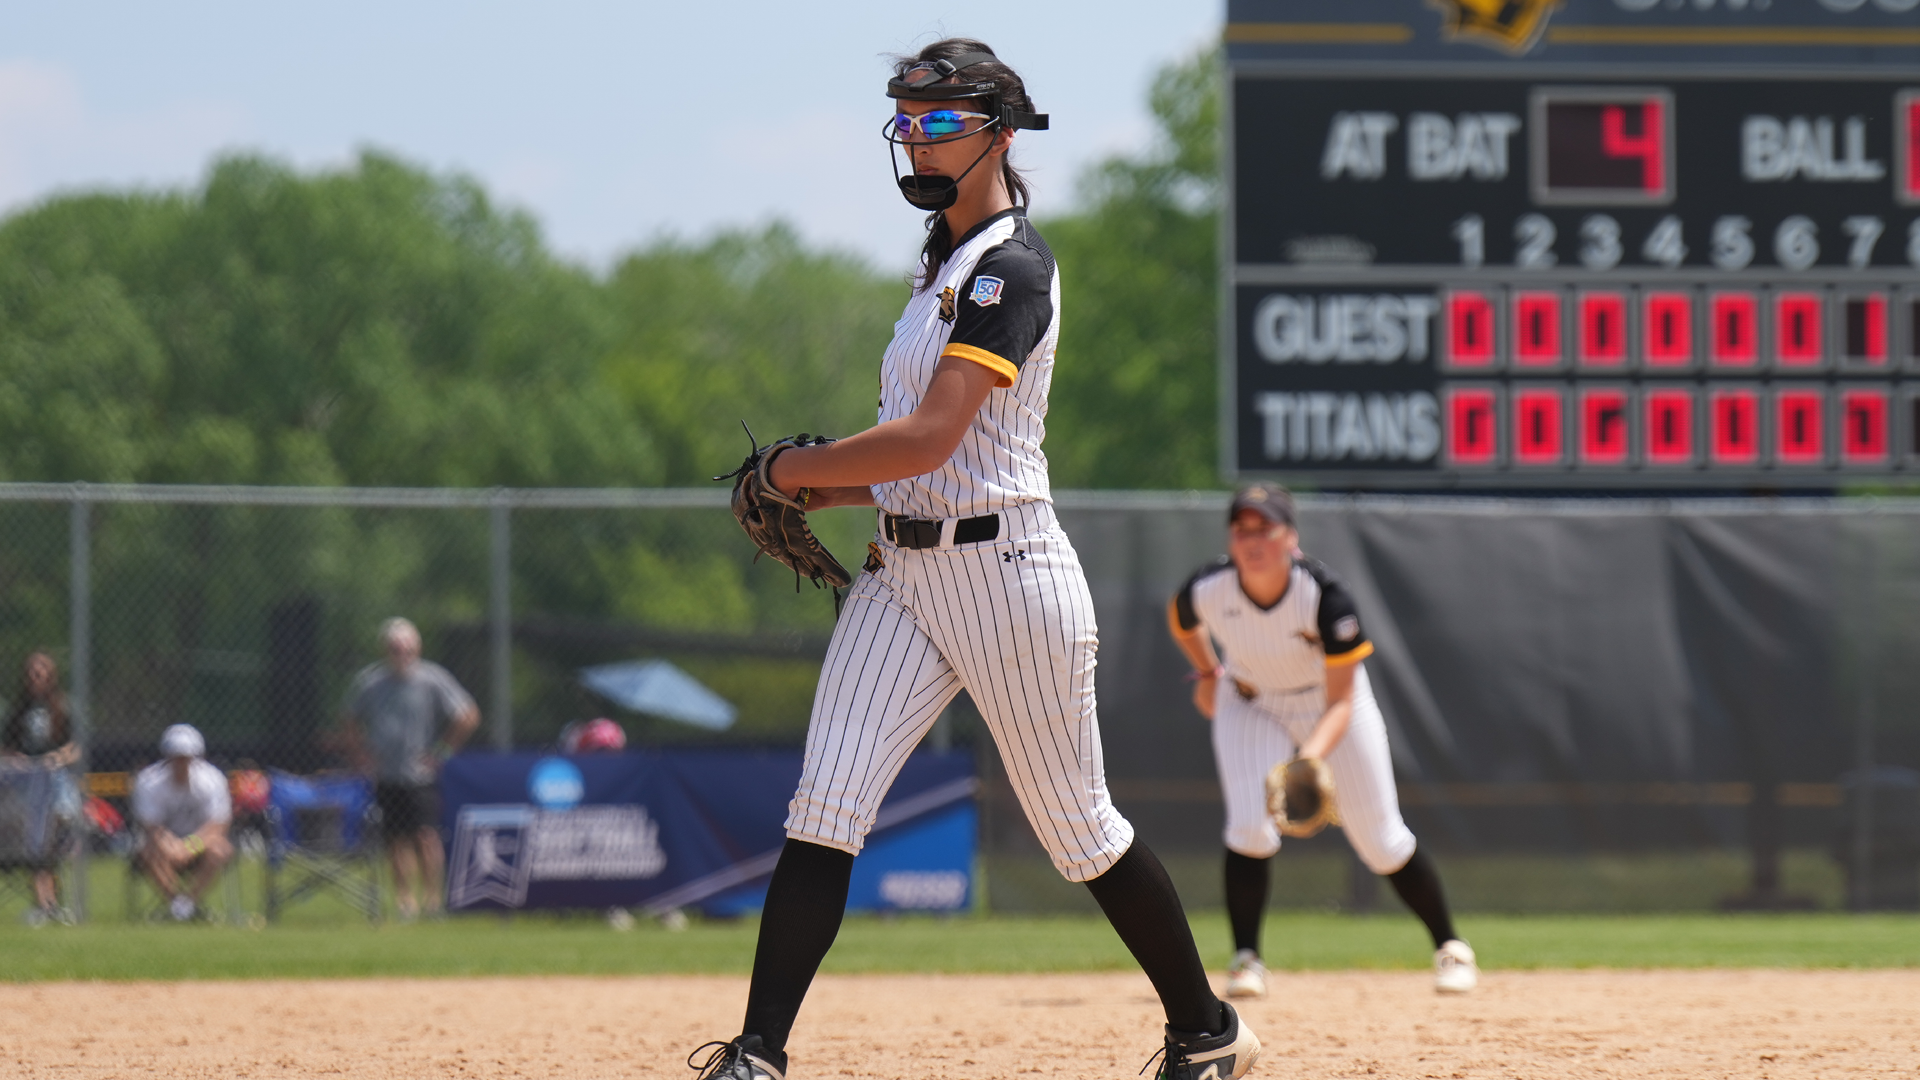 Brianna Bougie picked up the win in the Titans' 1-0 victory over Illinois Wesleyan on Friday. Photo Credit: Terri Cole, UW-Oshkosh Sports Information